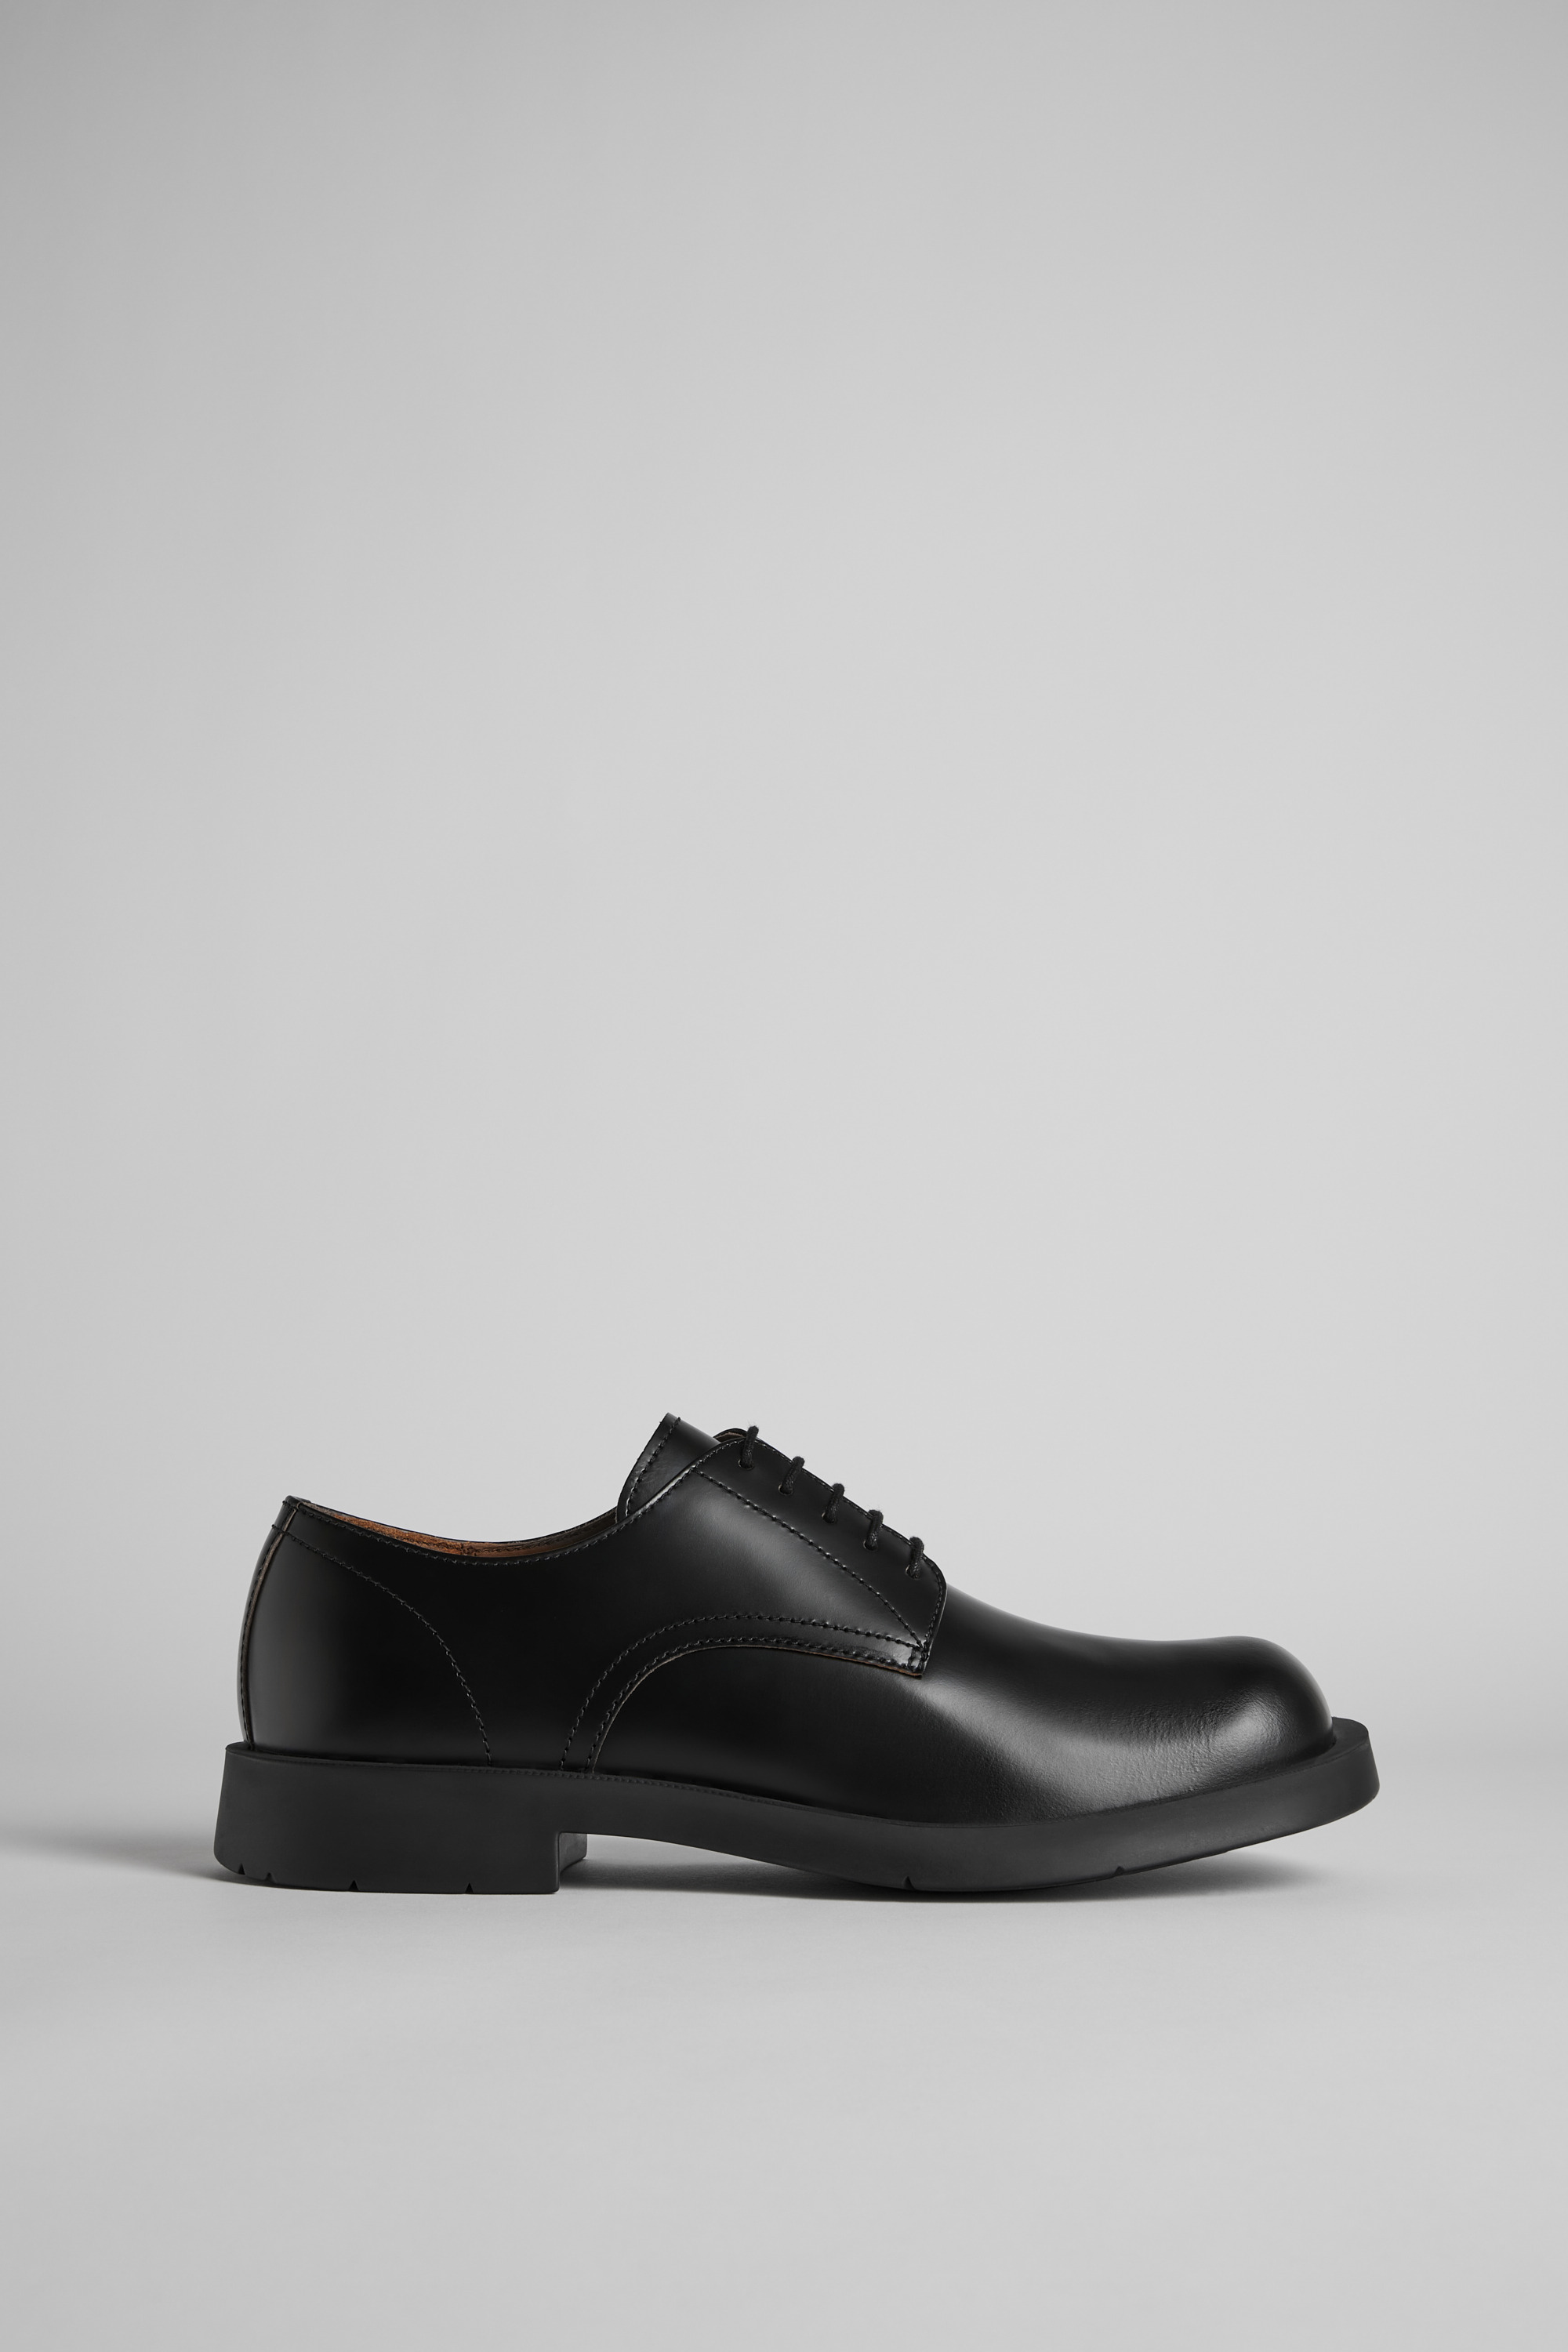 Neuman Black Loafers for Unisex - Spring/Summer collection ...